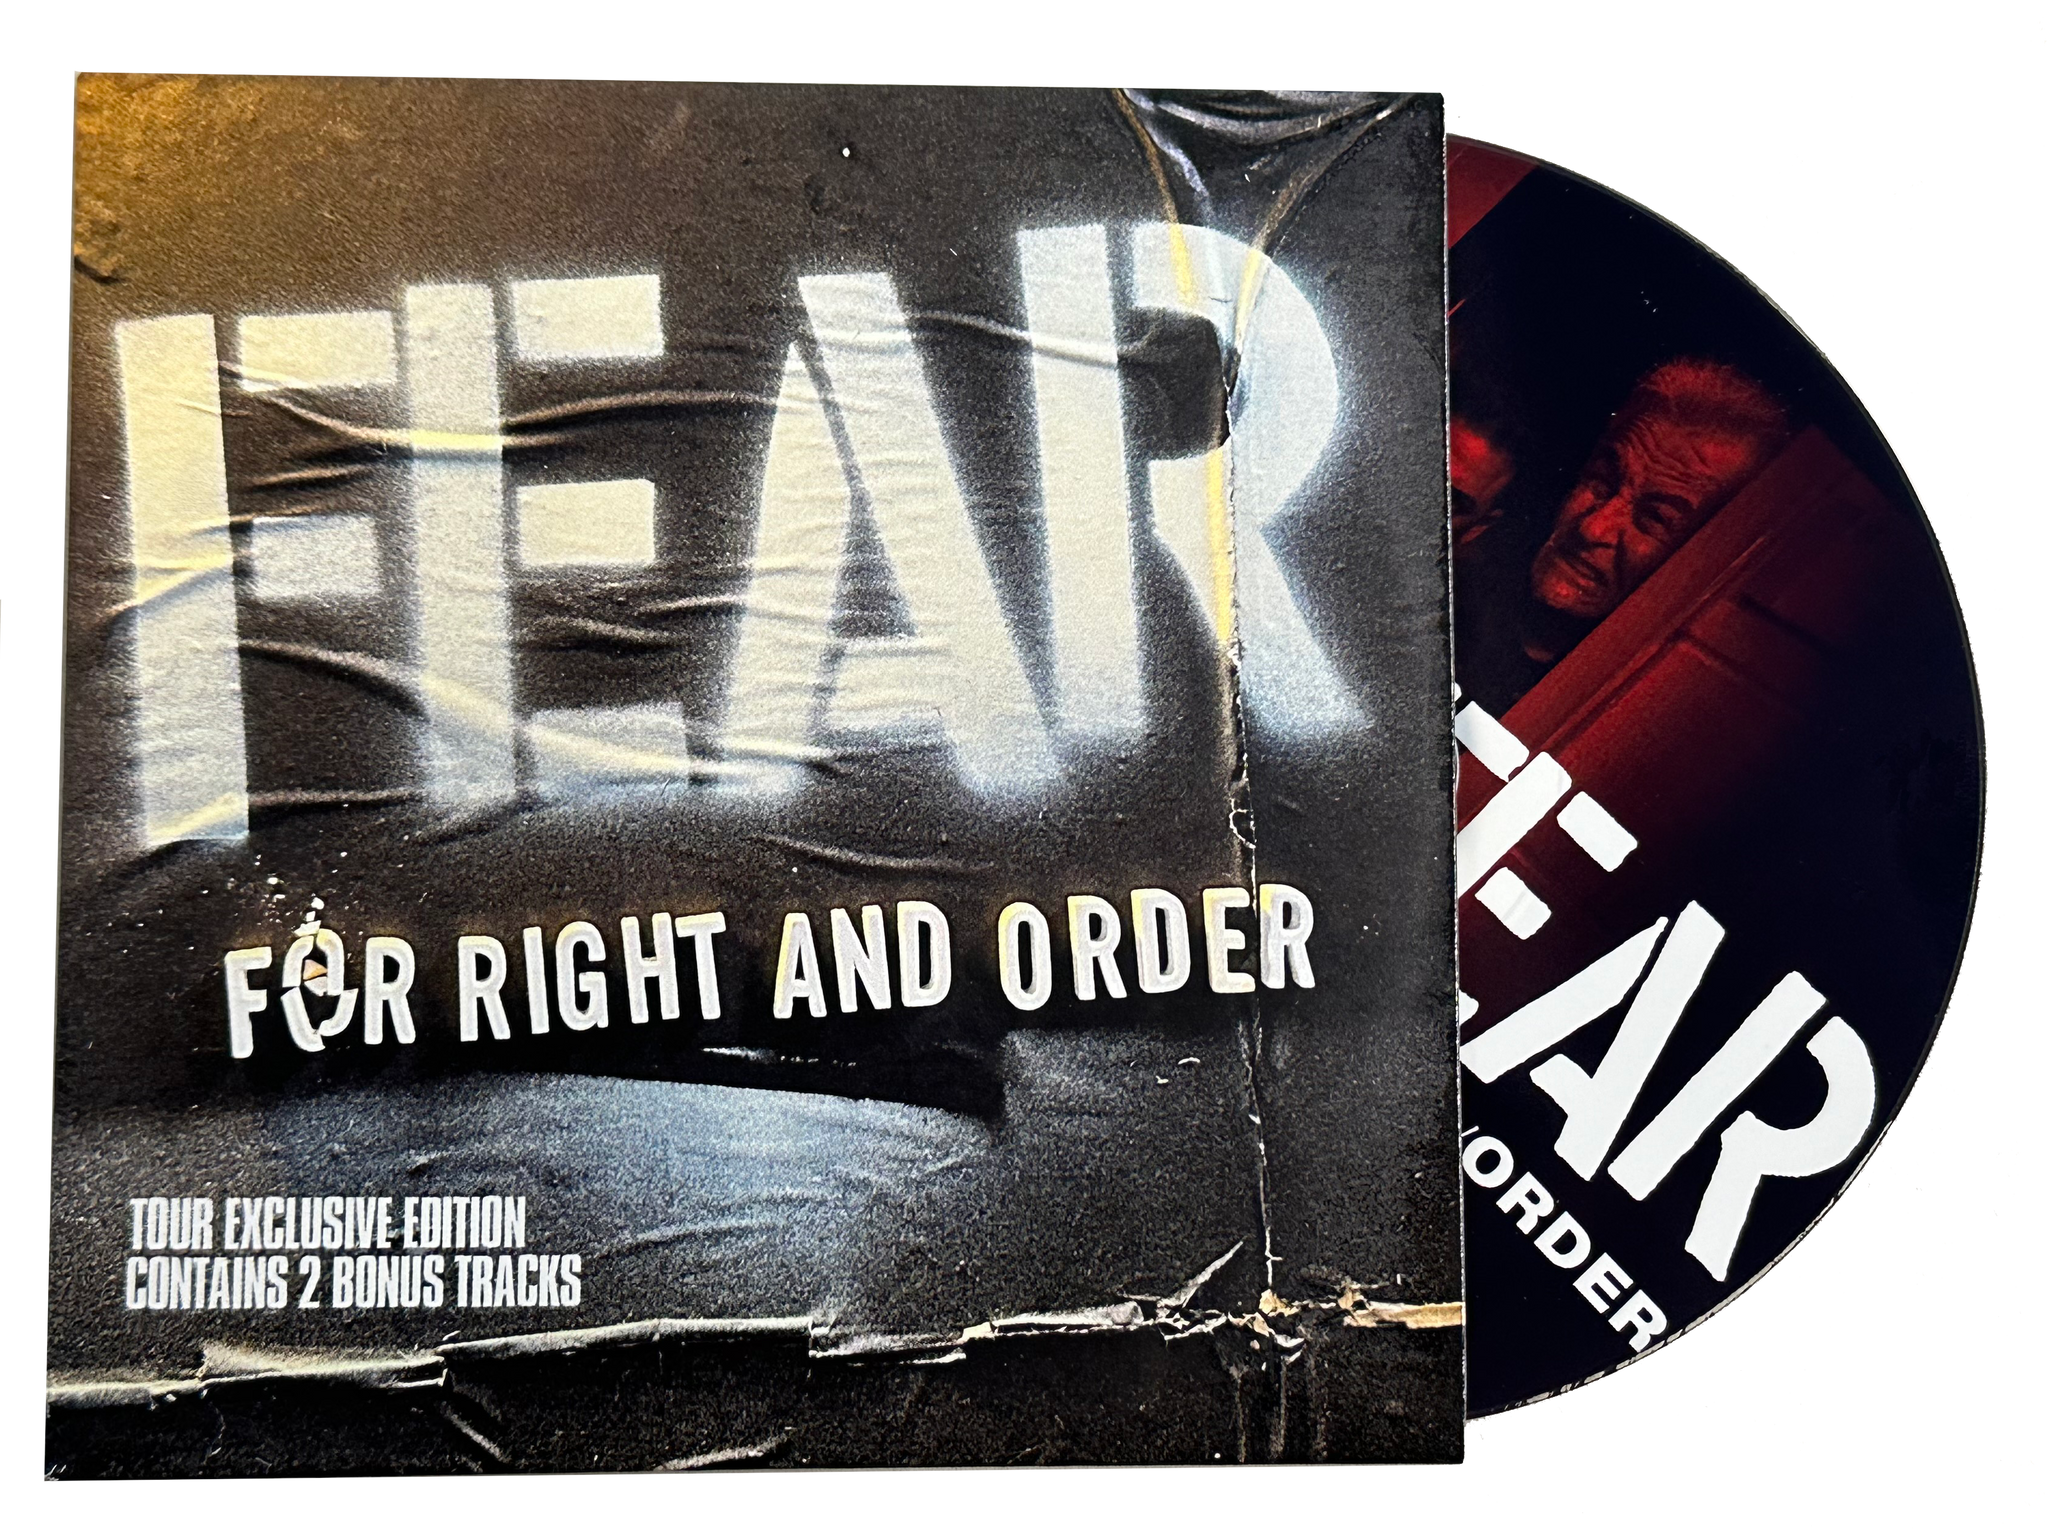 FEAR "FOR RIGHT AND ORDER" LIMITED EDITION TOUR CD (CONTAINS 2 BONUS TRACKS)